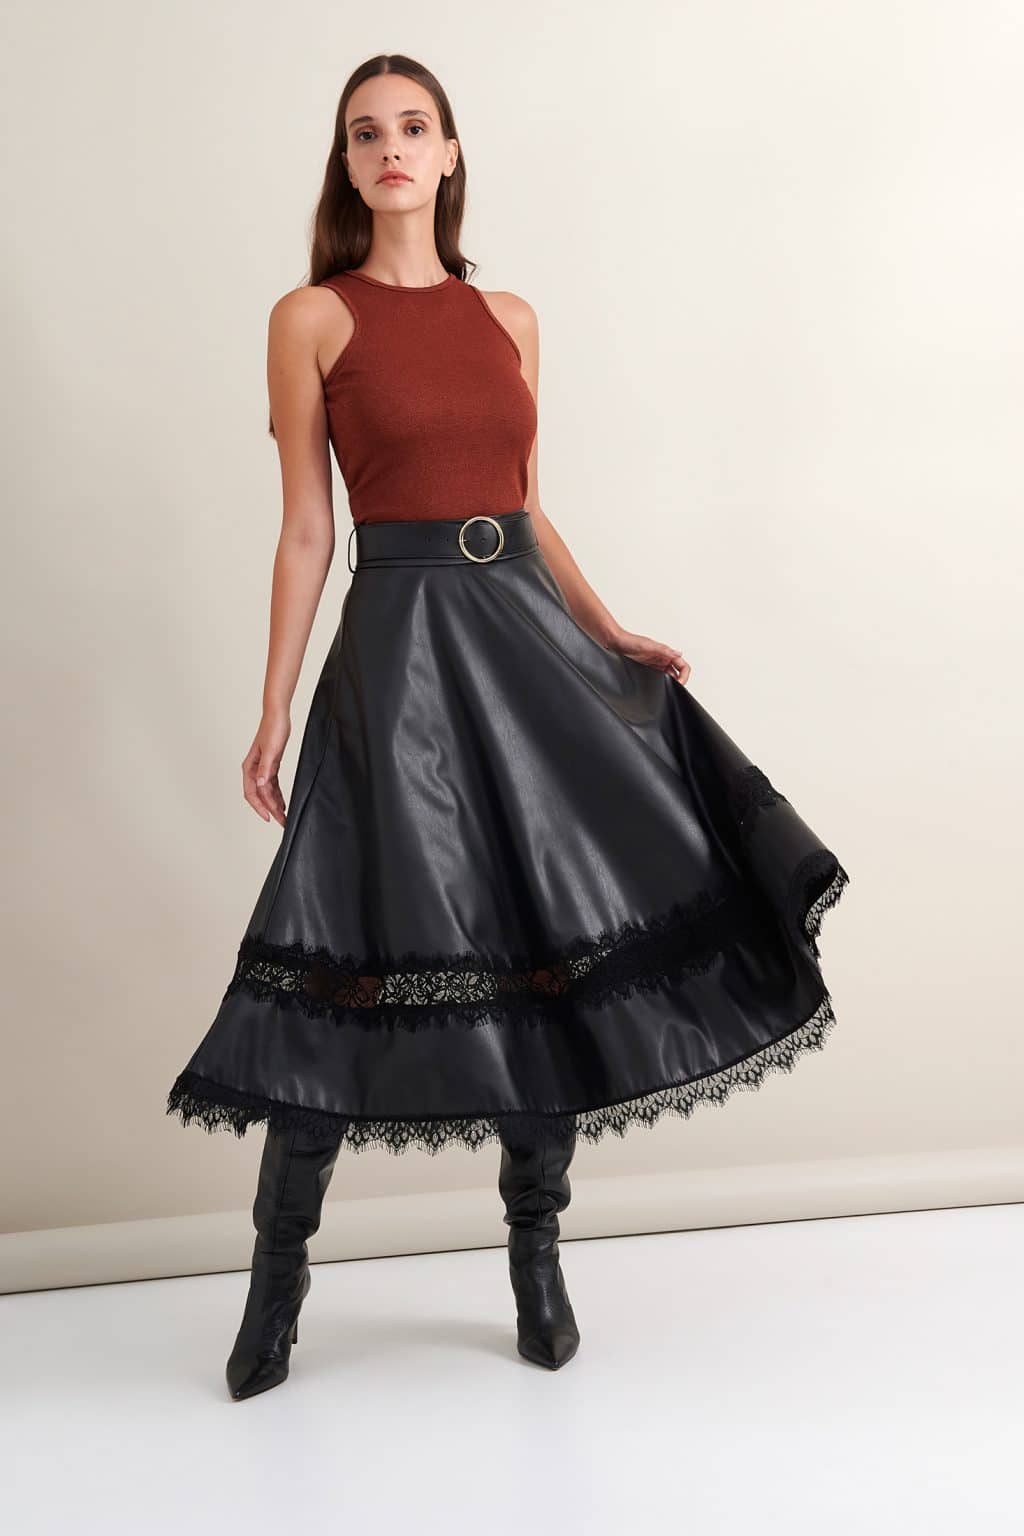 Clothing LACE LEATHER SKIRT